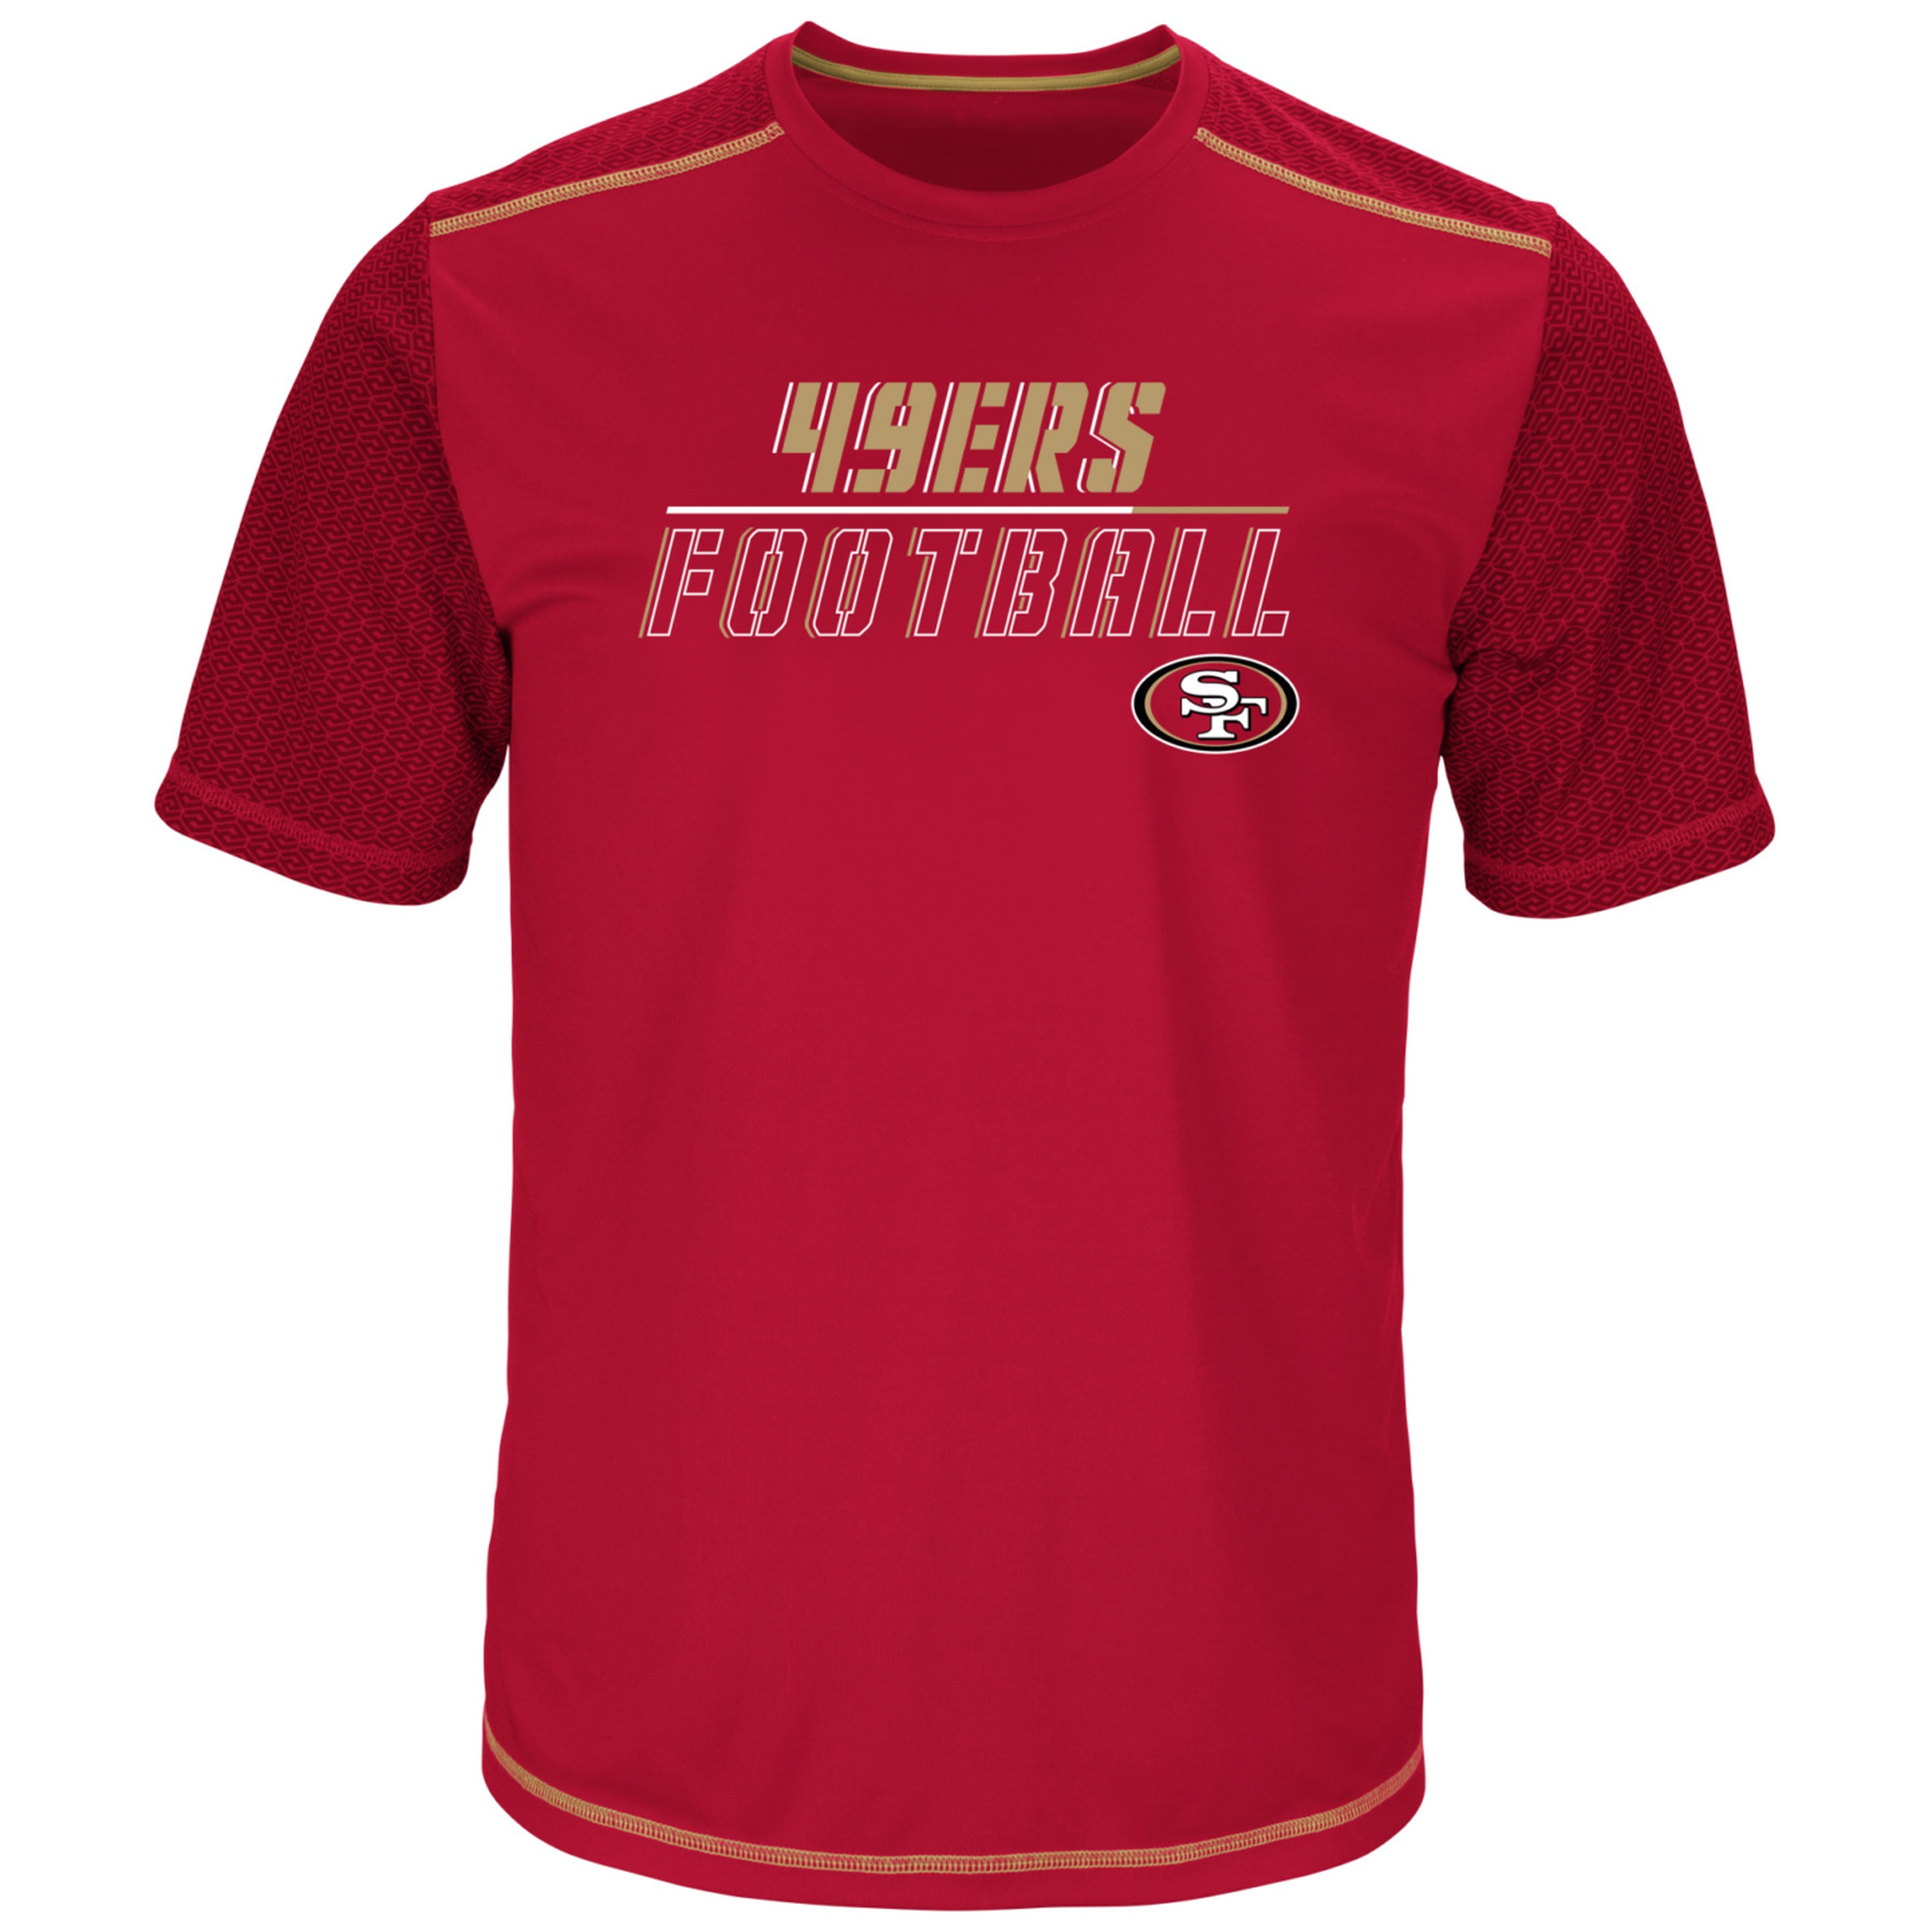 NFL San Francisco 49ers Absolute Speed Men's Big and Tall Short Sleeve Tee - image 2 of 2